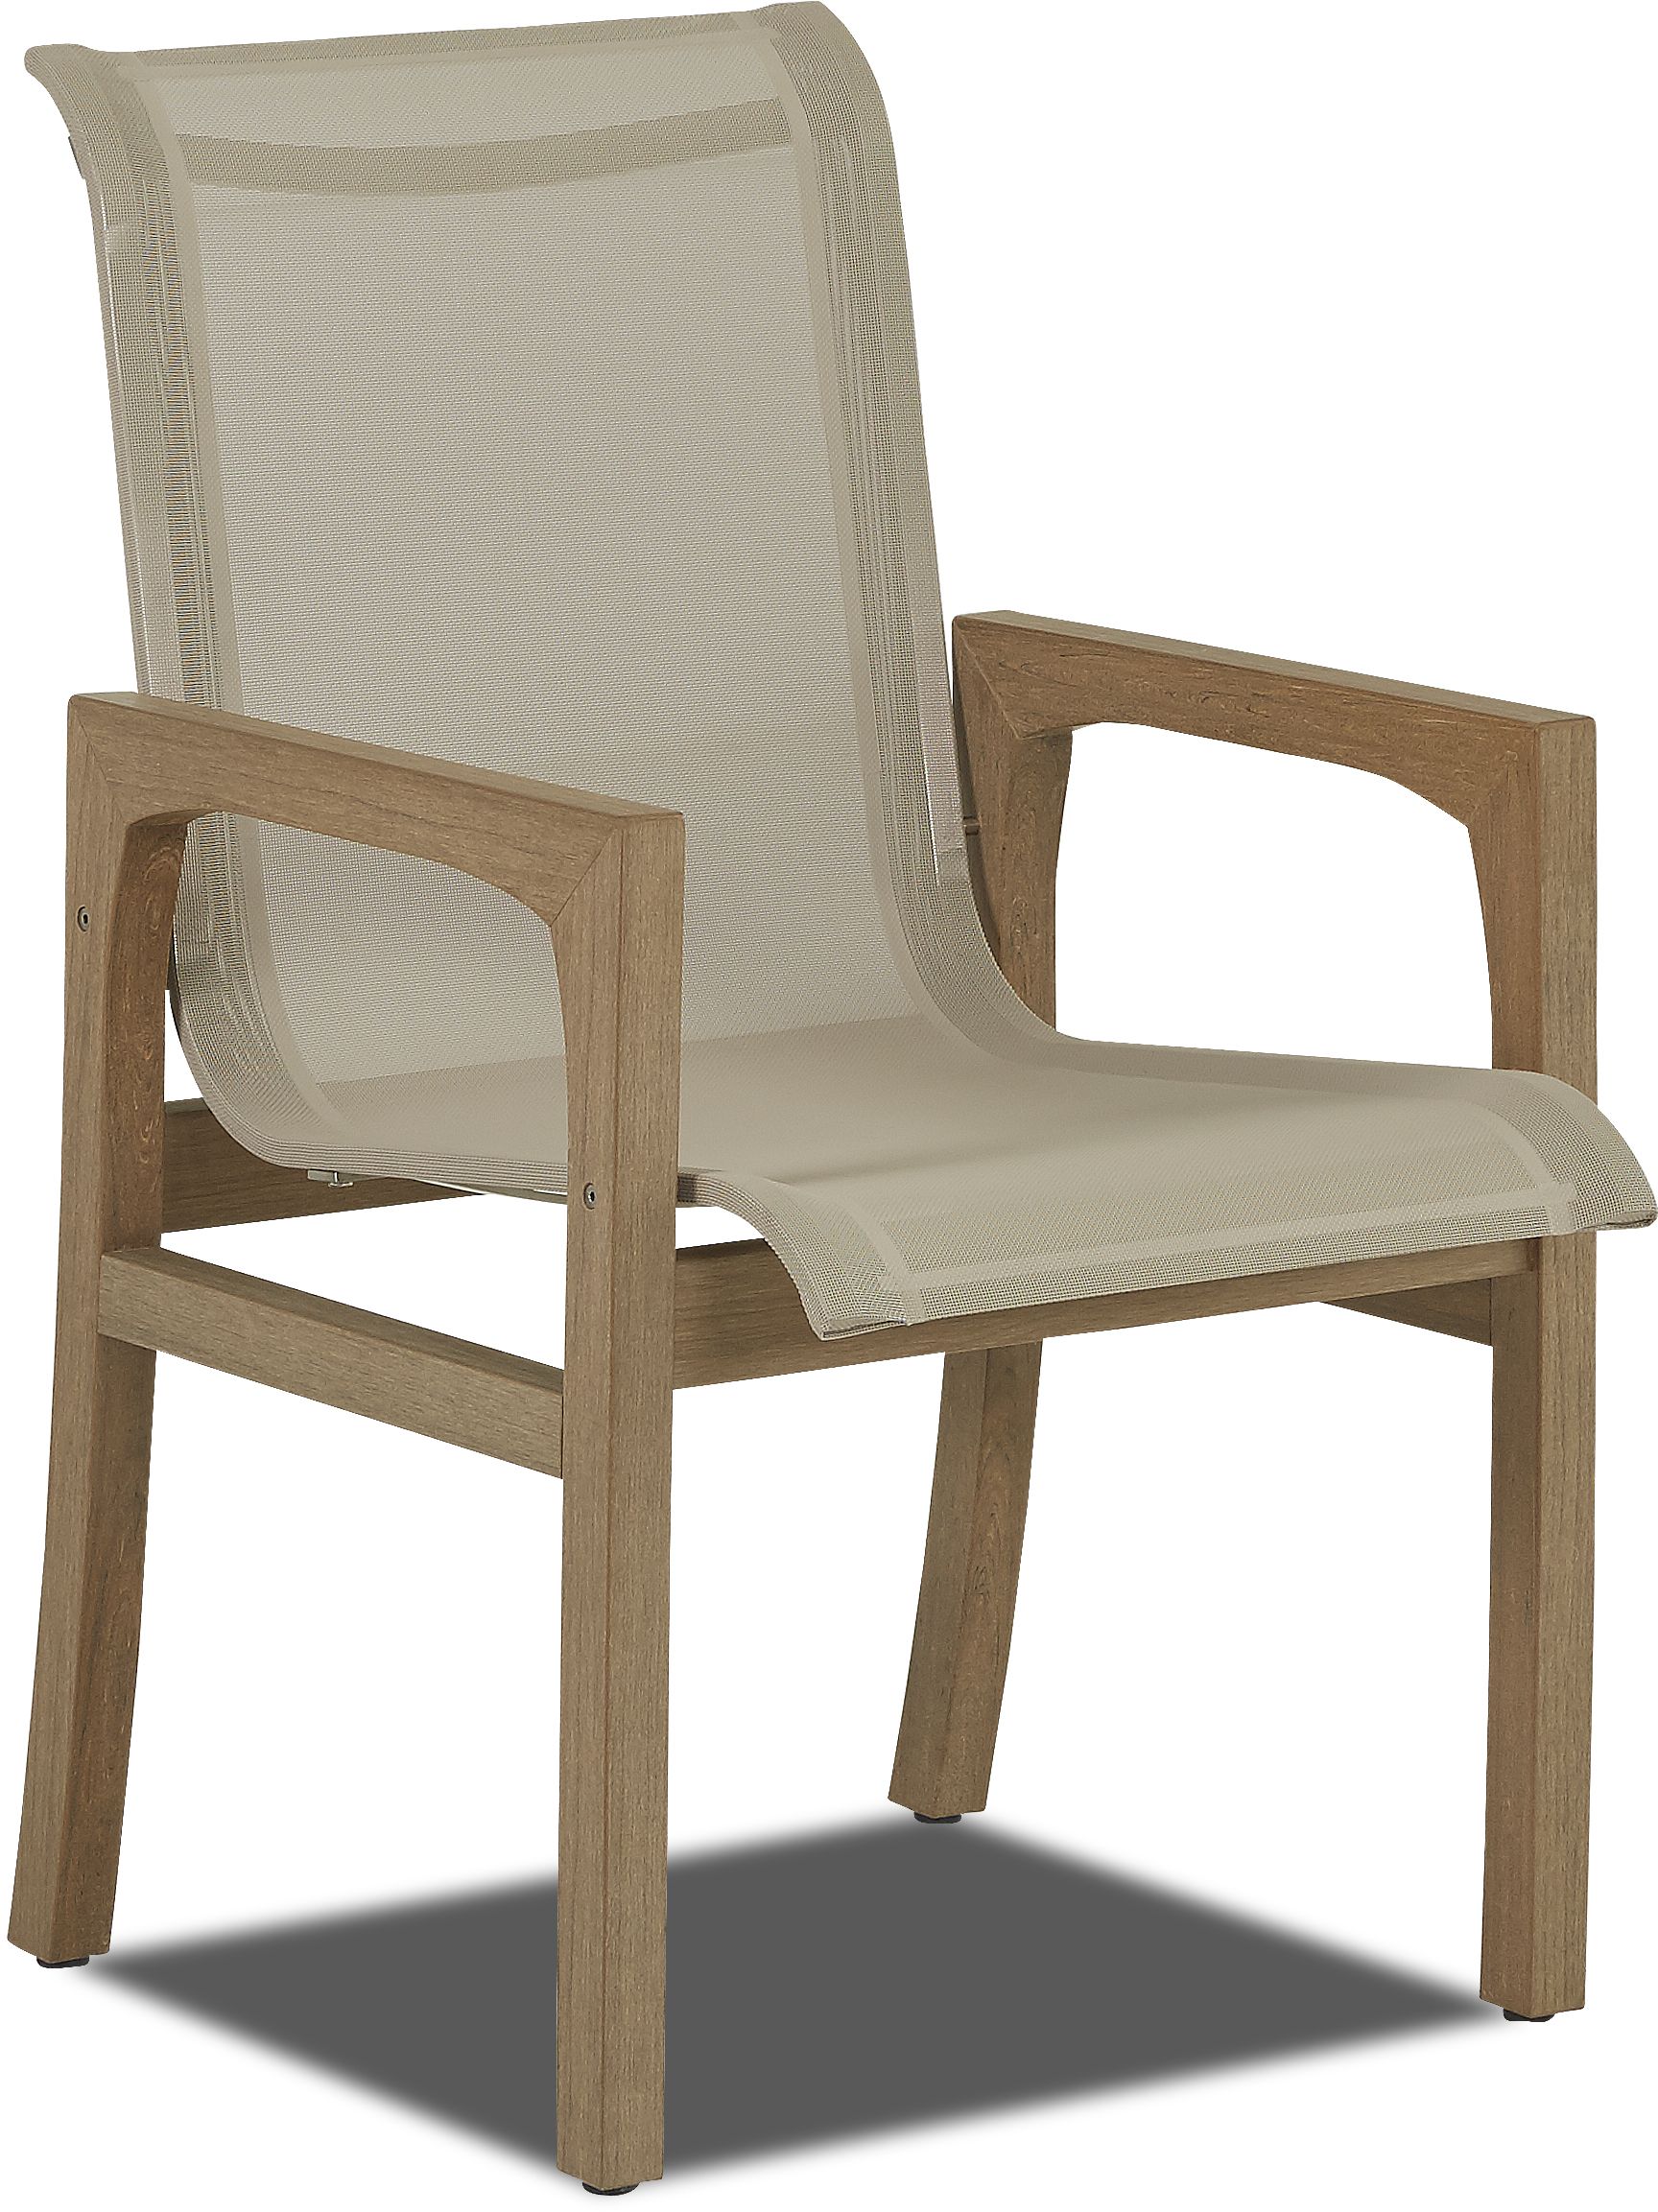 Klaussner® Outdoor Delray Sling Dining Chair